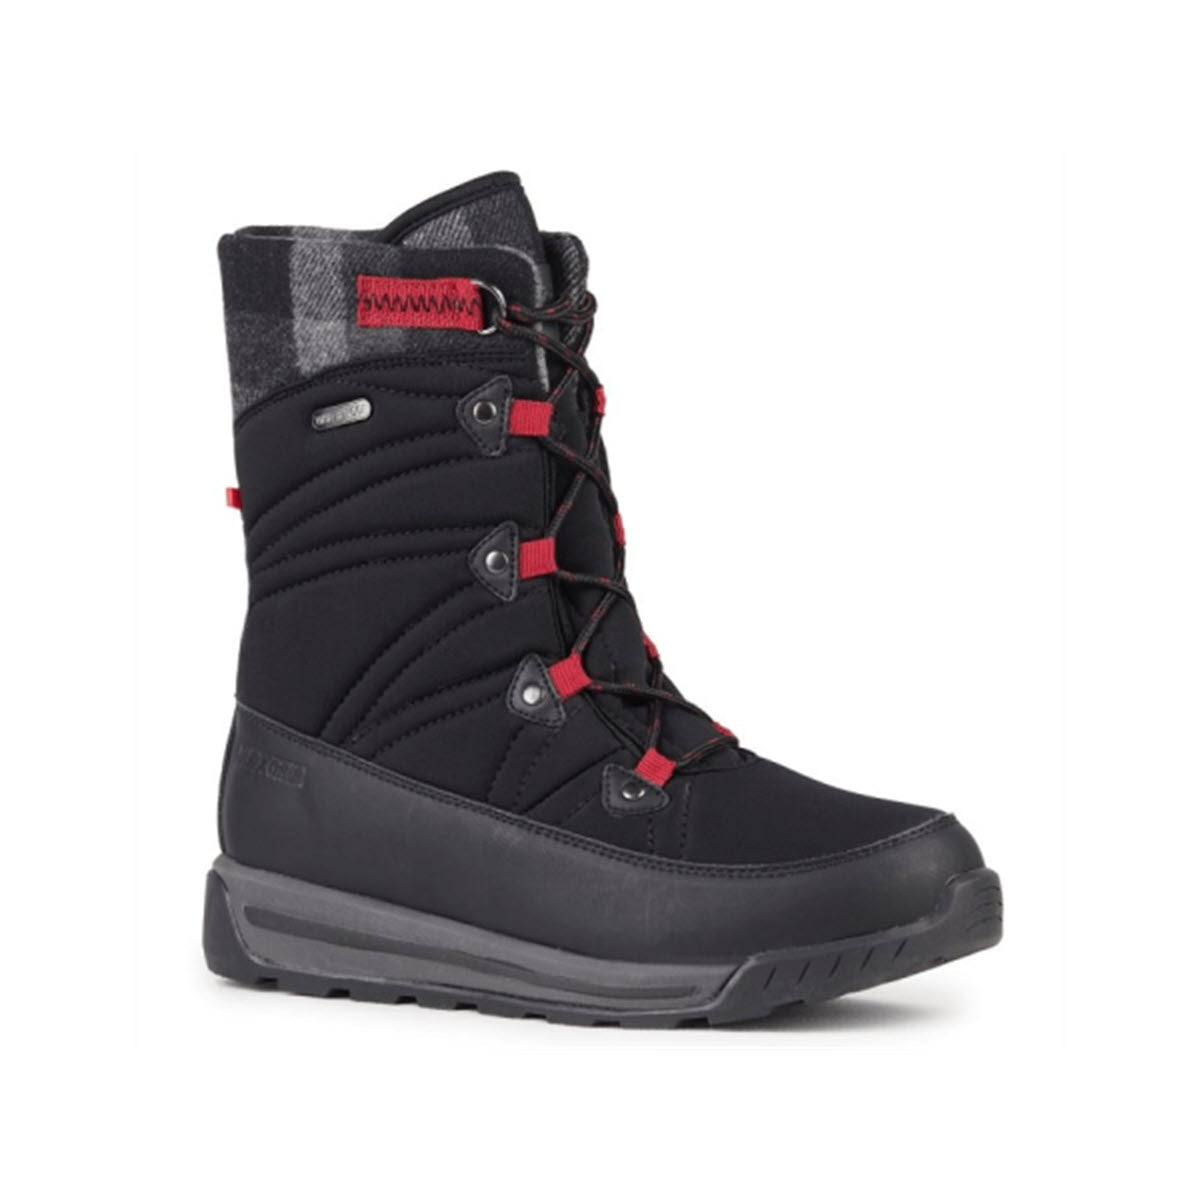 A NexGrip Ice Wonder High Black Repel - Womens winter boot with red detailing, featuring a high ankle design and laced front, set against a white background.